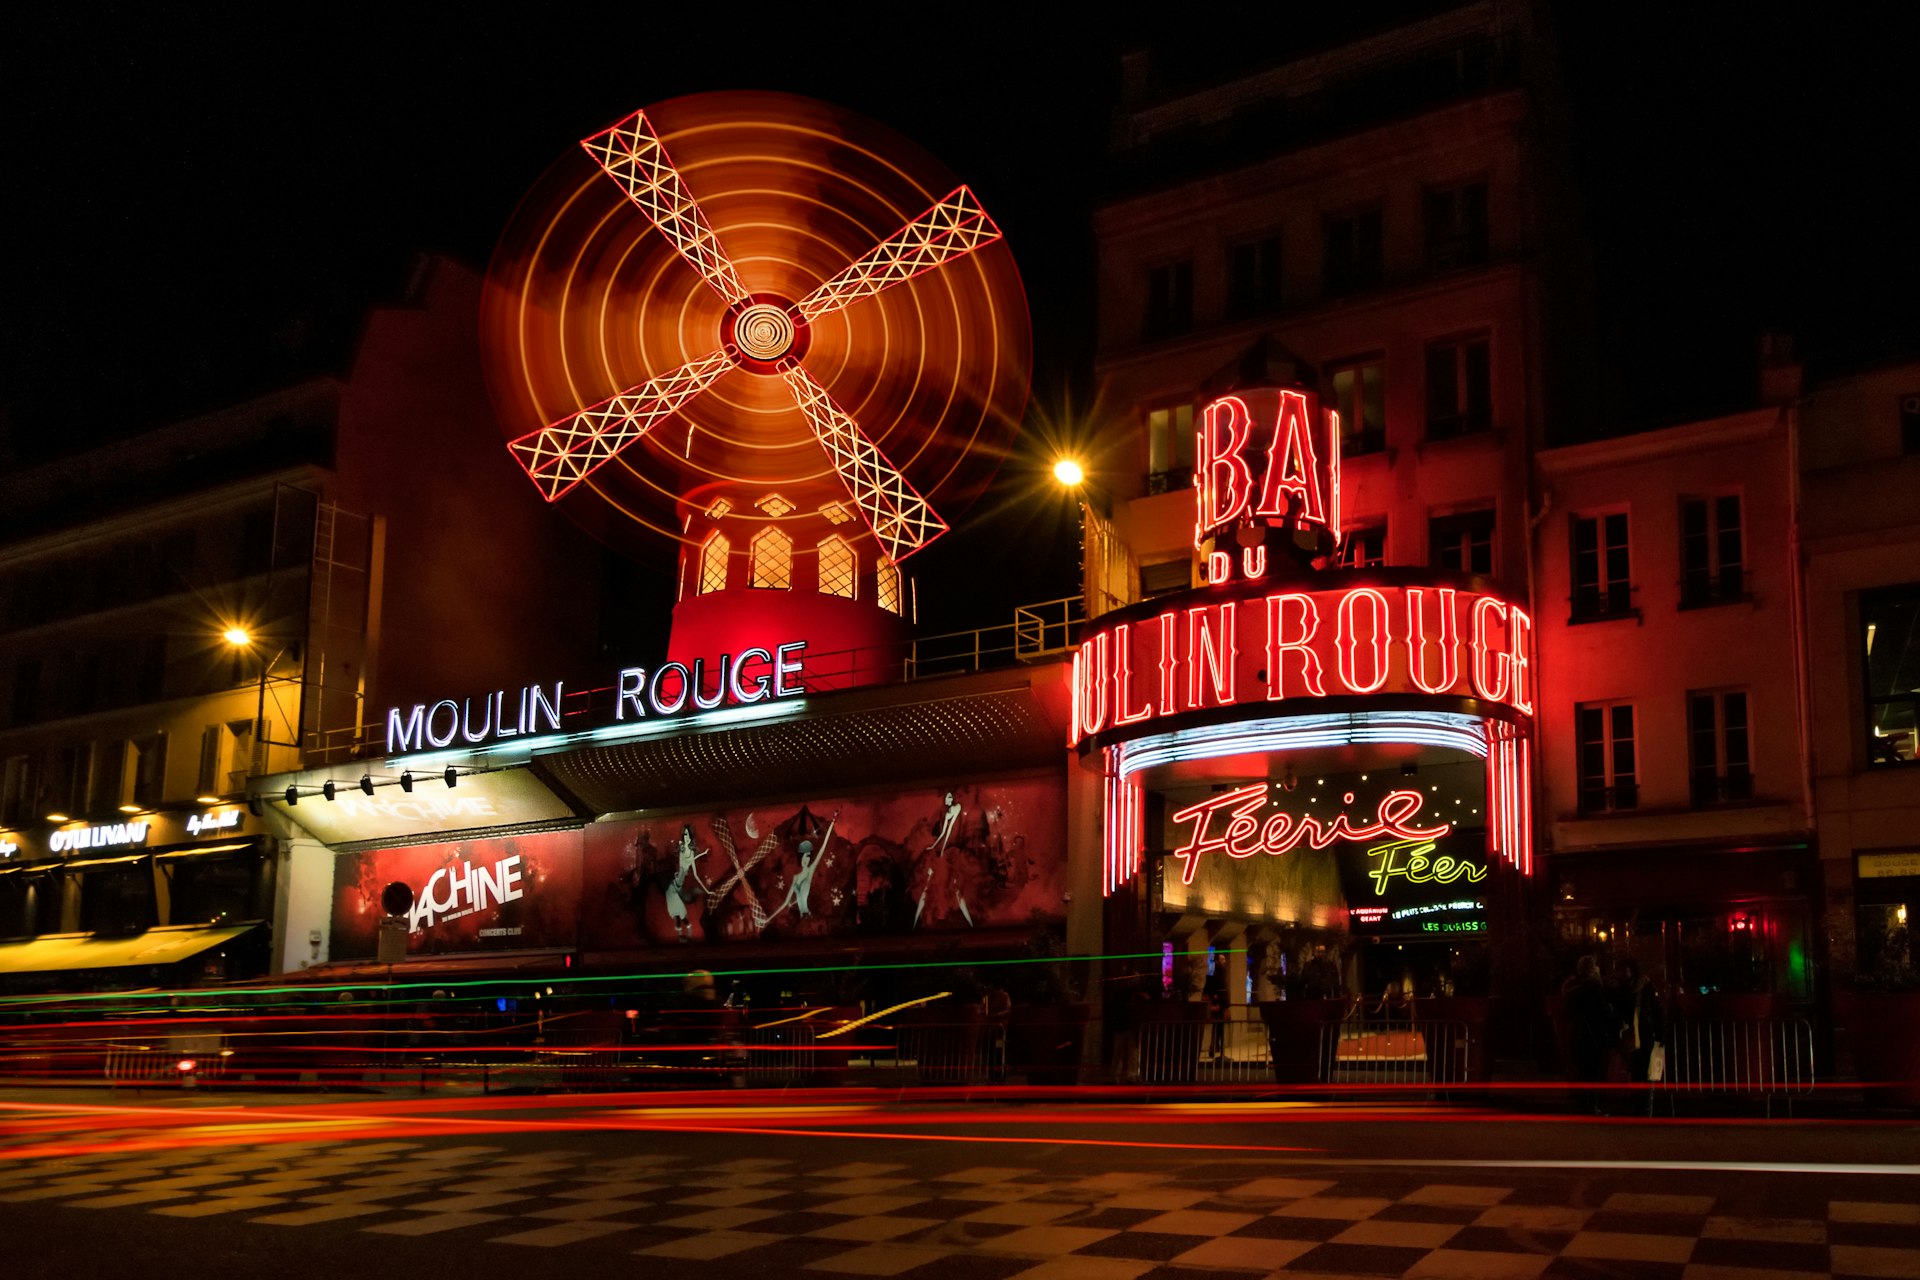 Moulin Rouge in Paris, France at night